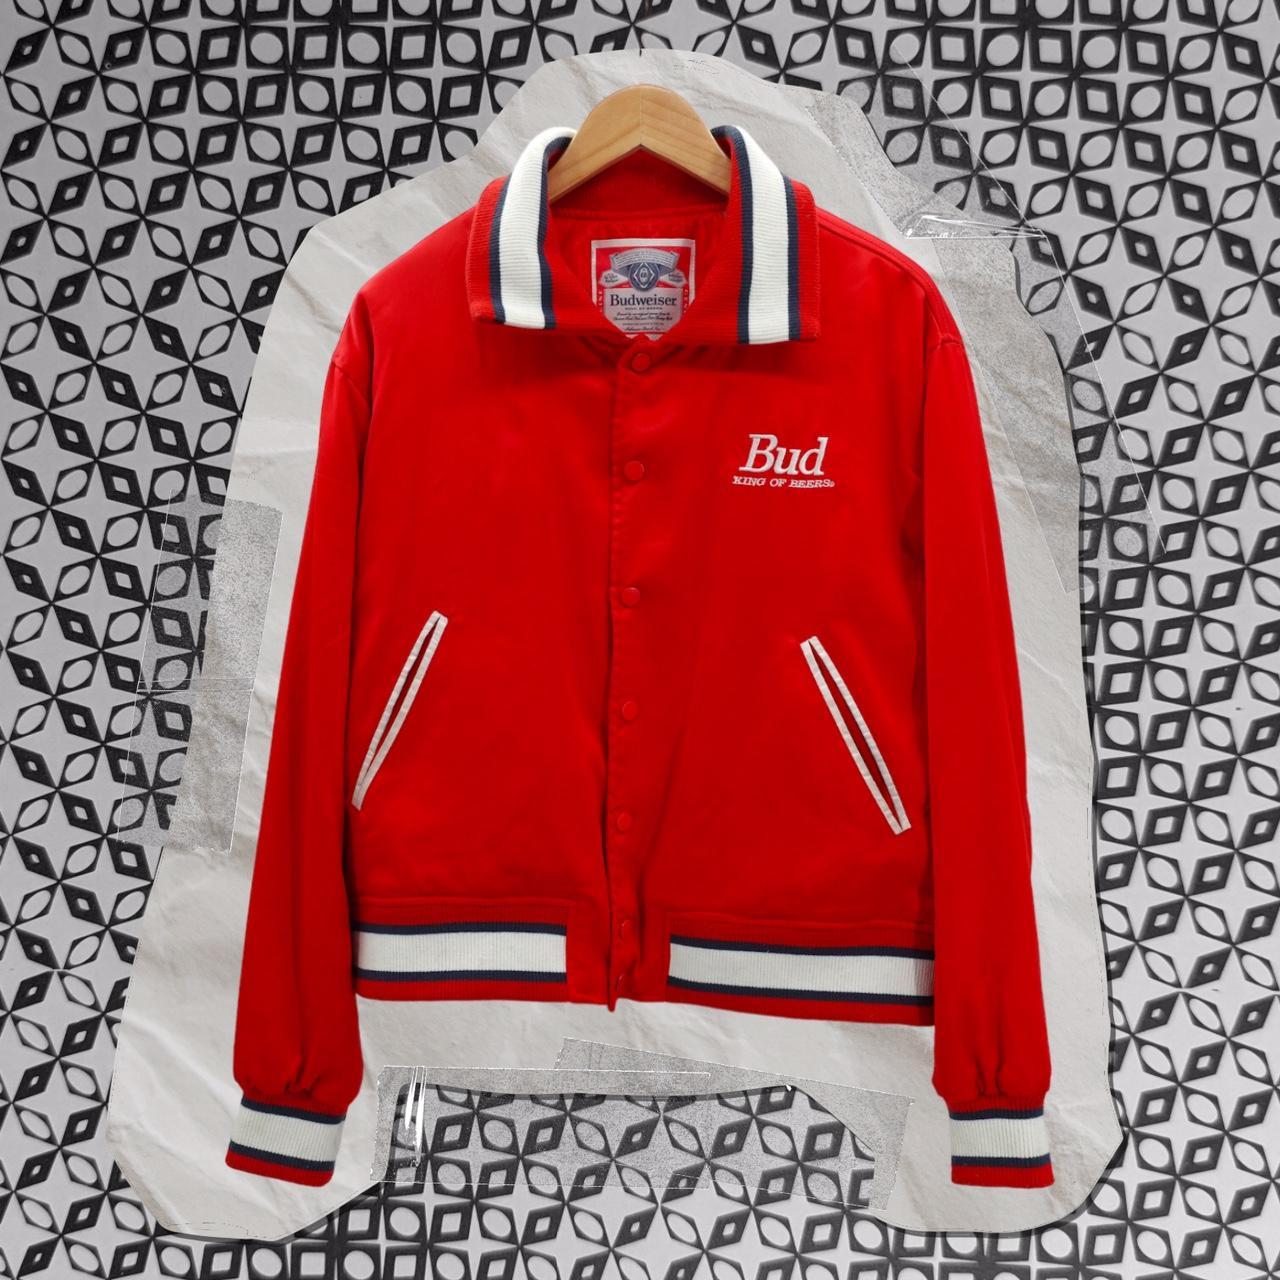 Budweiser By PacSun King Of Beers Letterman Jacket